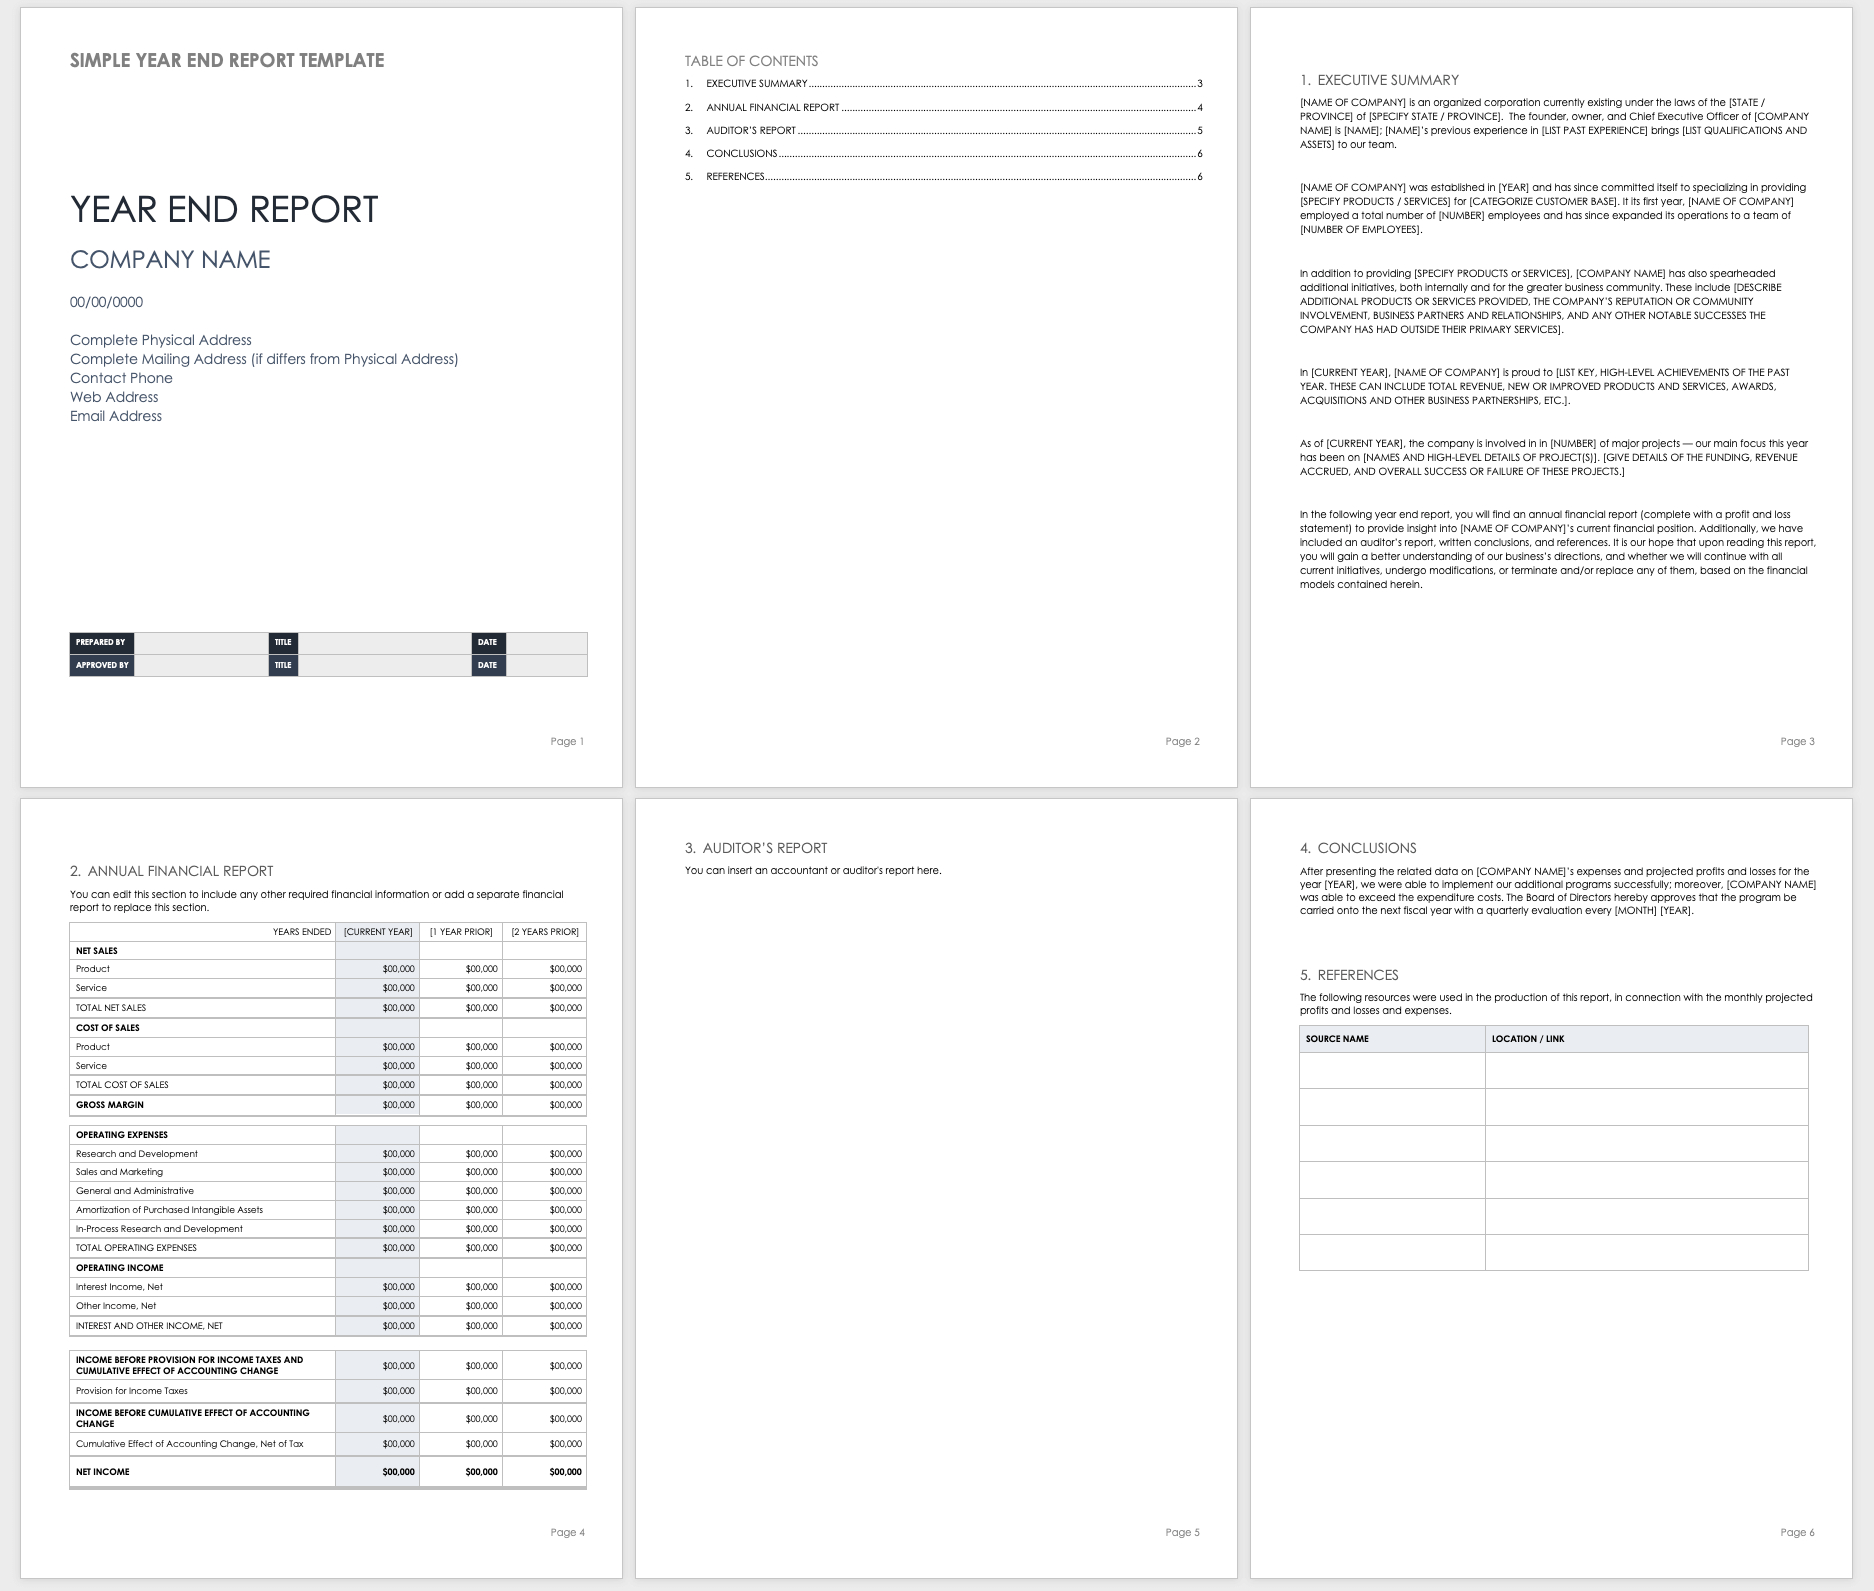 Free Year End Report Templates | Smartsheet With Regard To Simple Report Template Word